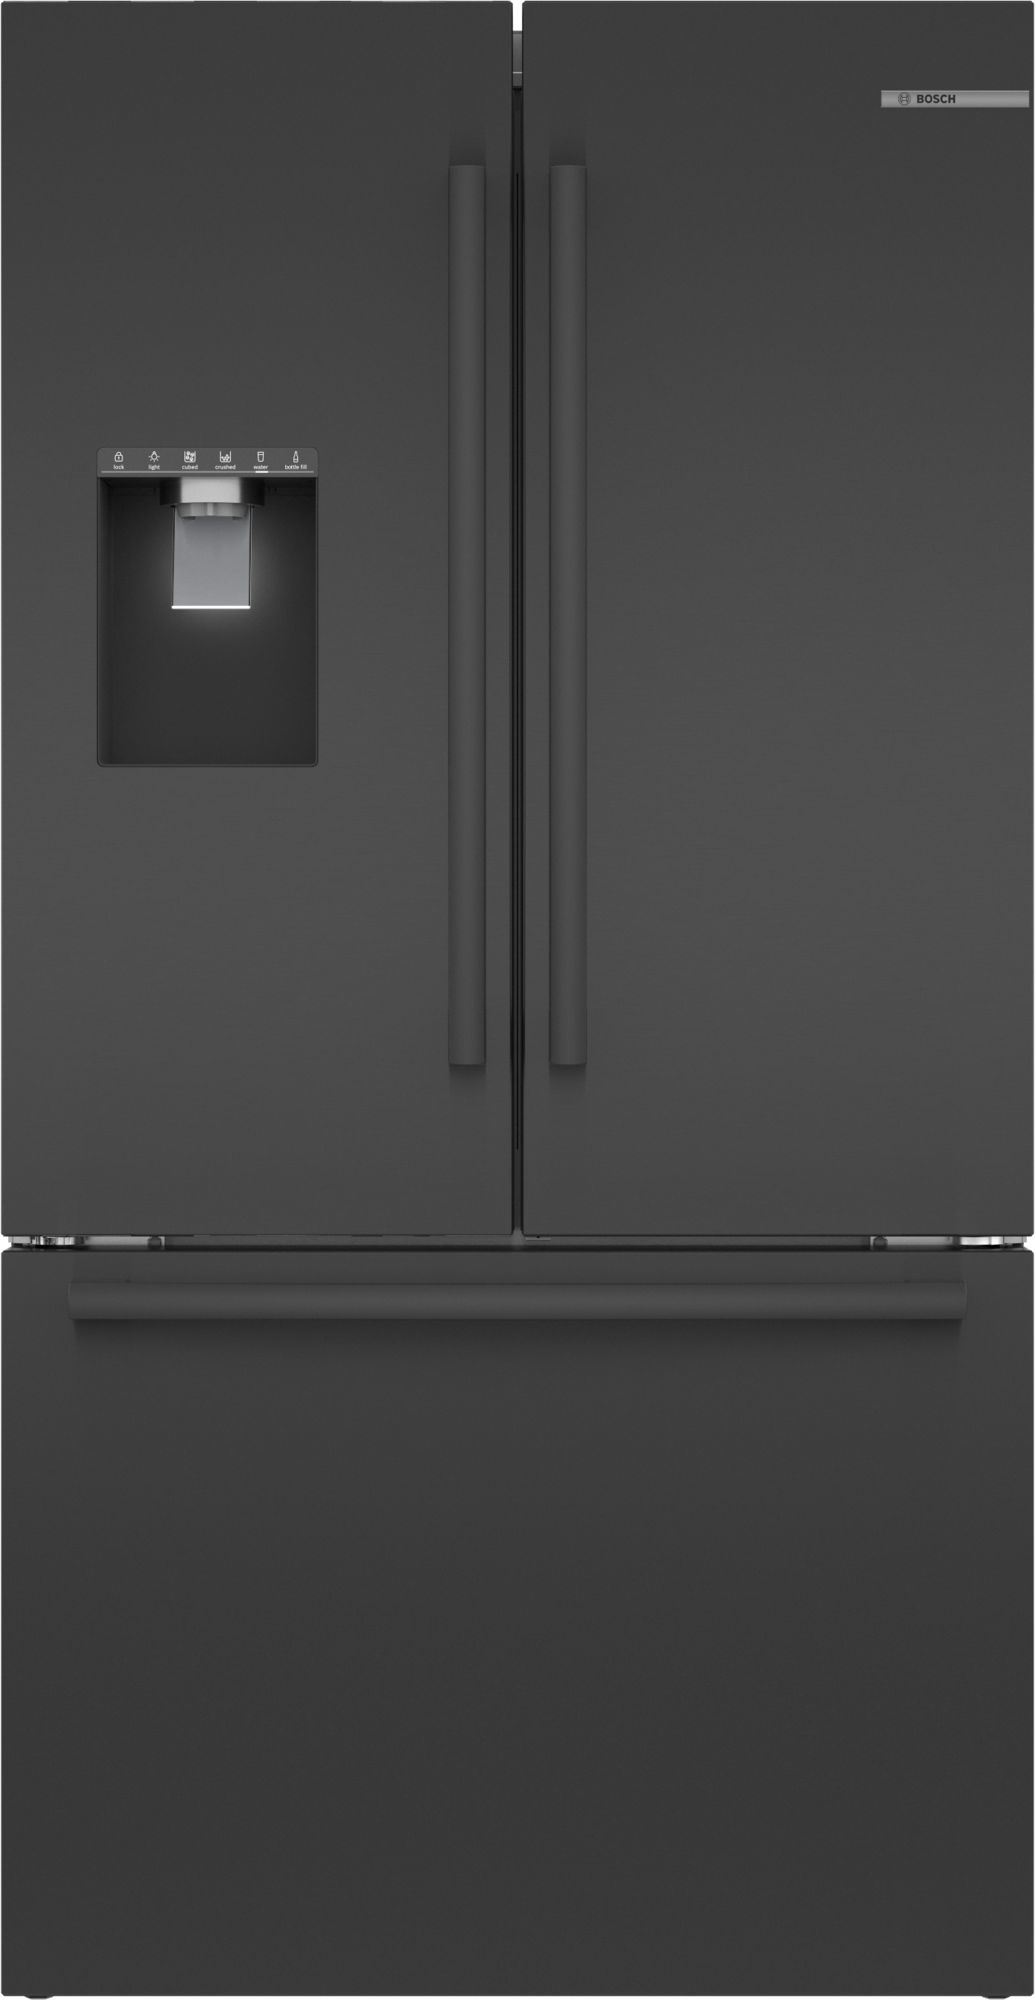 500 Series French Door Bottom Mount Refrigerator 36'' Easy clean stainless steel B36FD50SNB